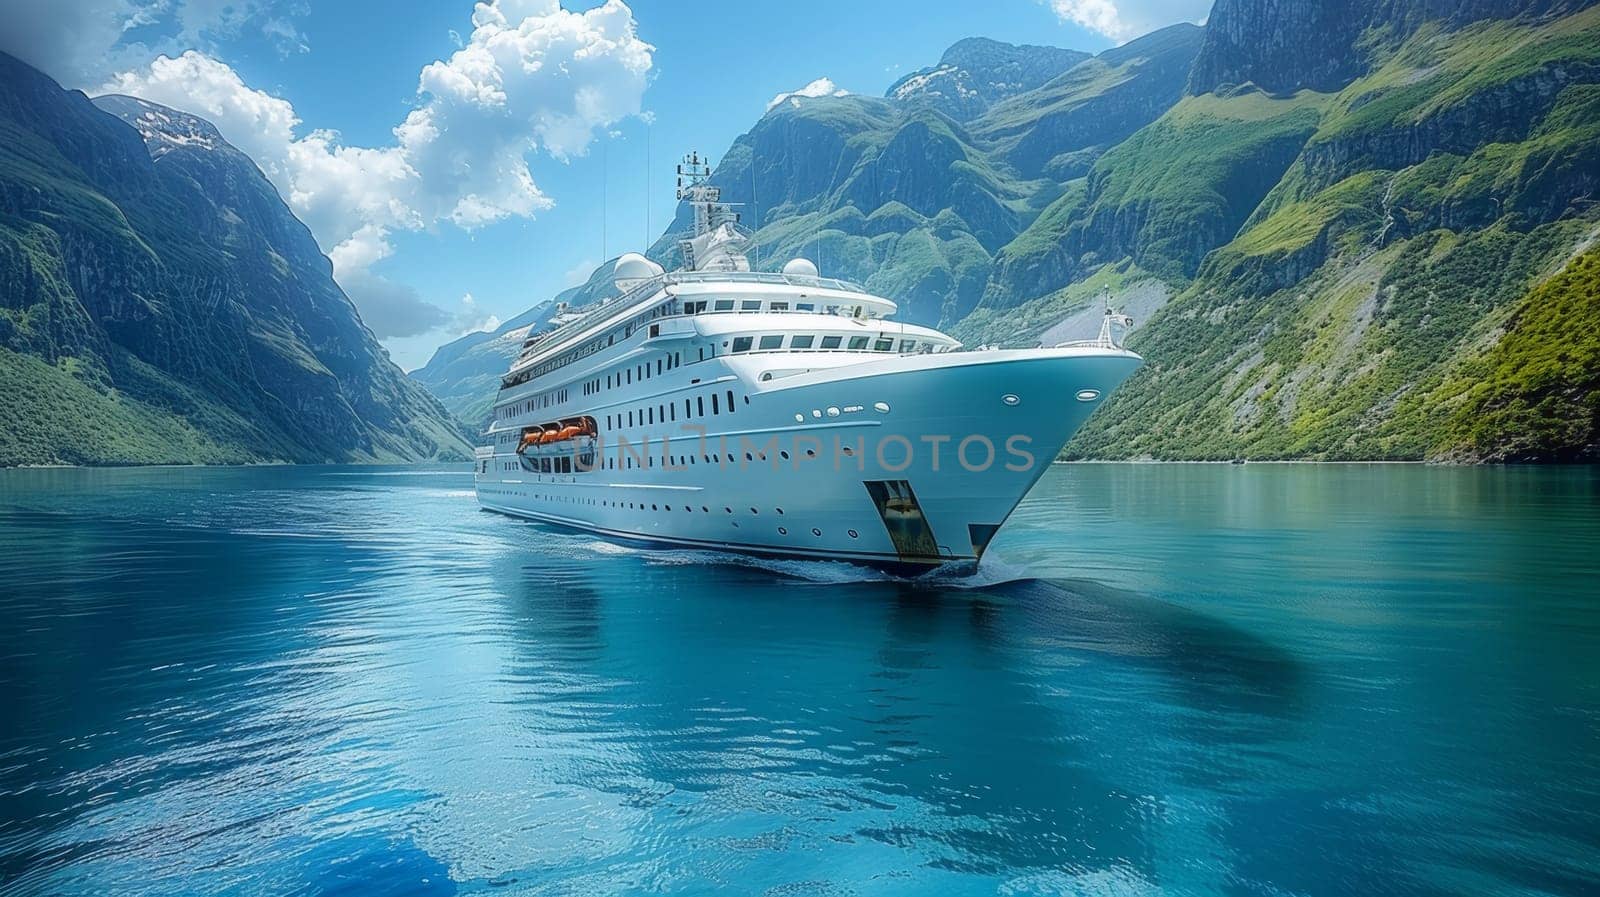 A large cruise ship is traveling through a body of water, AI by starush